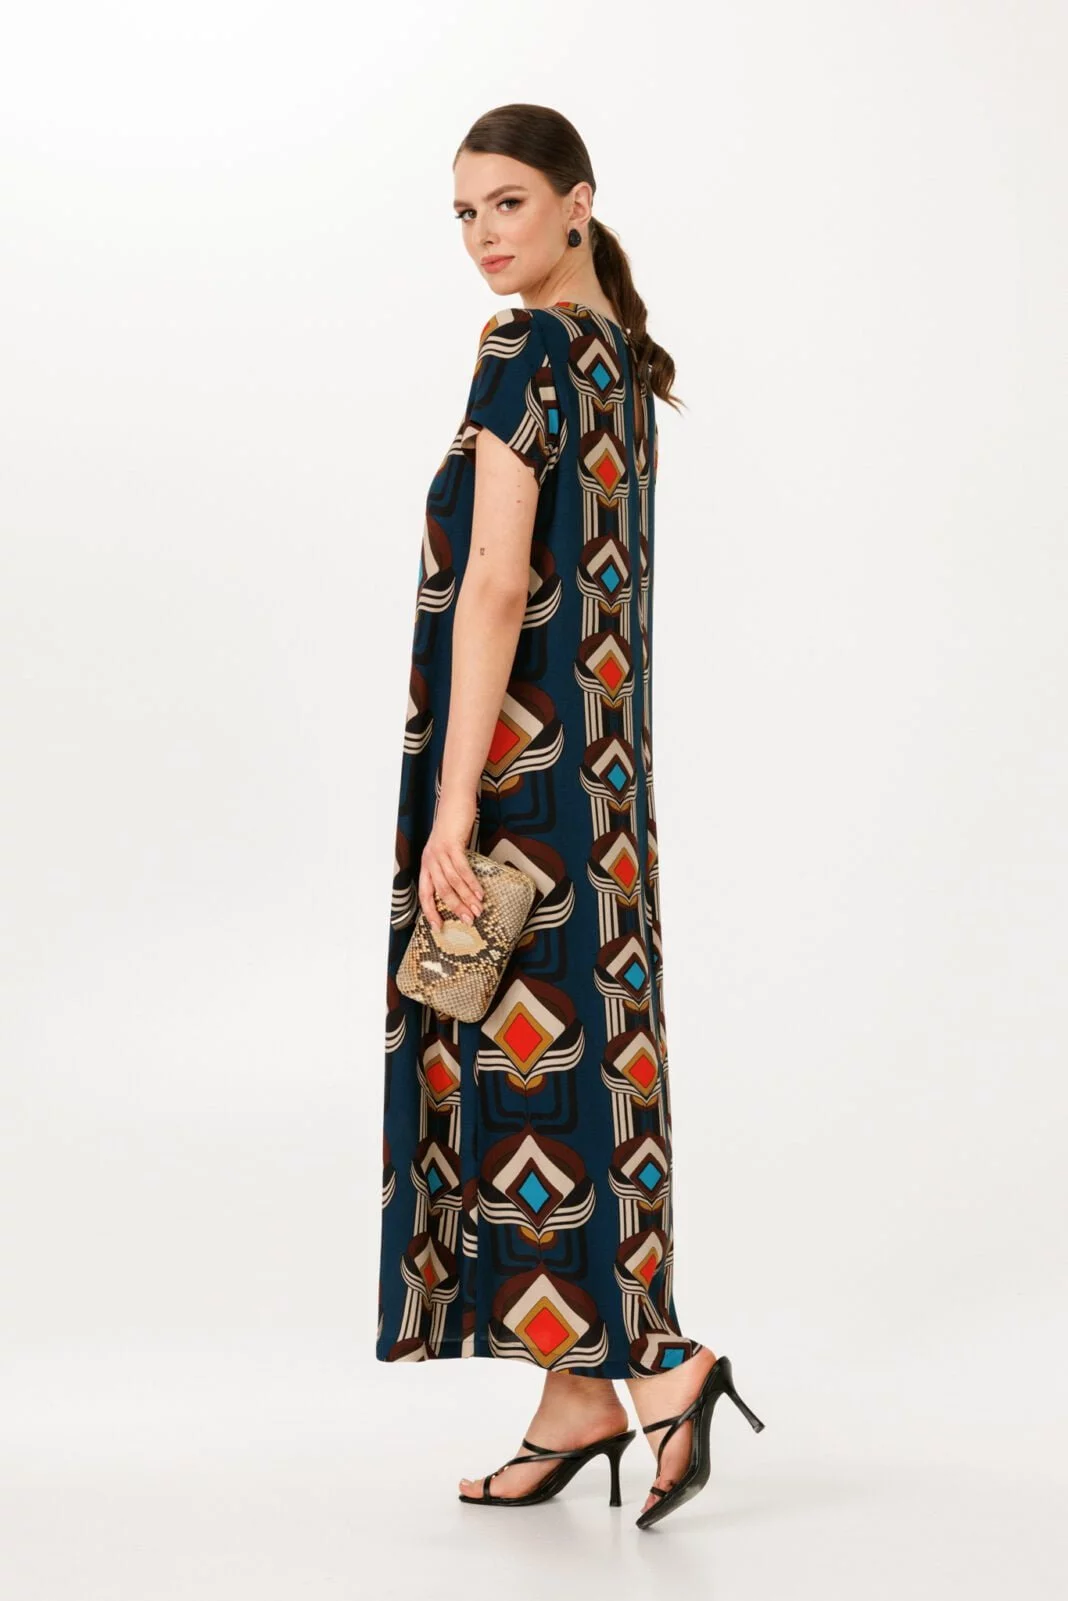 Summer Vacation Luxury Parties Middle East Inspired Europe Made Maxi Kaftan Dress - Navy Aztec Print Elegance